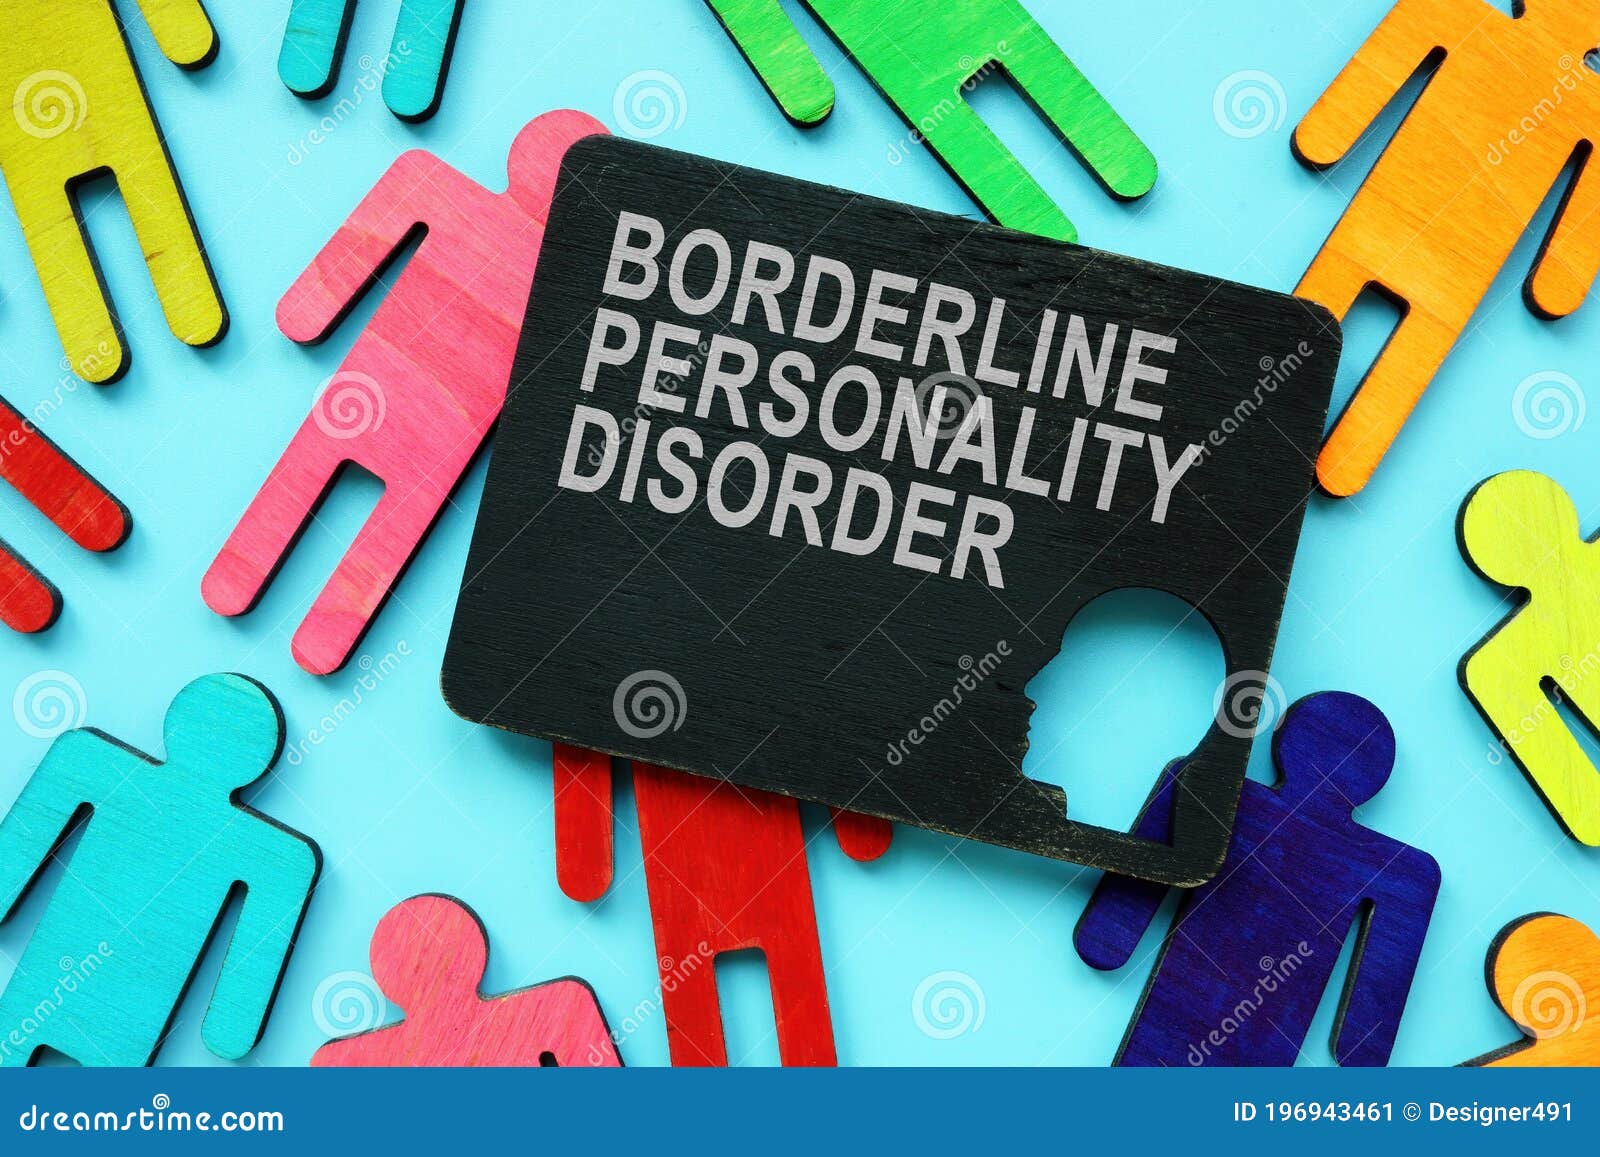 plate with borderline personality disorder bpd words.